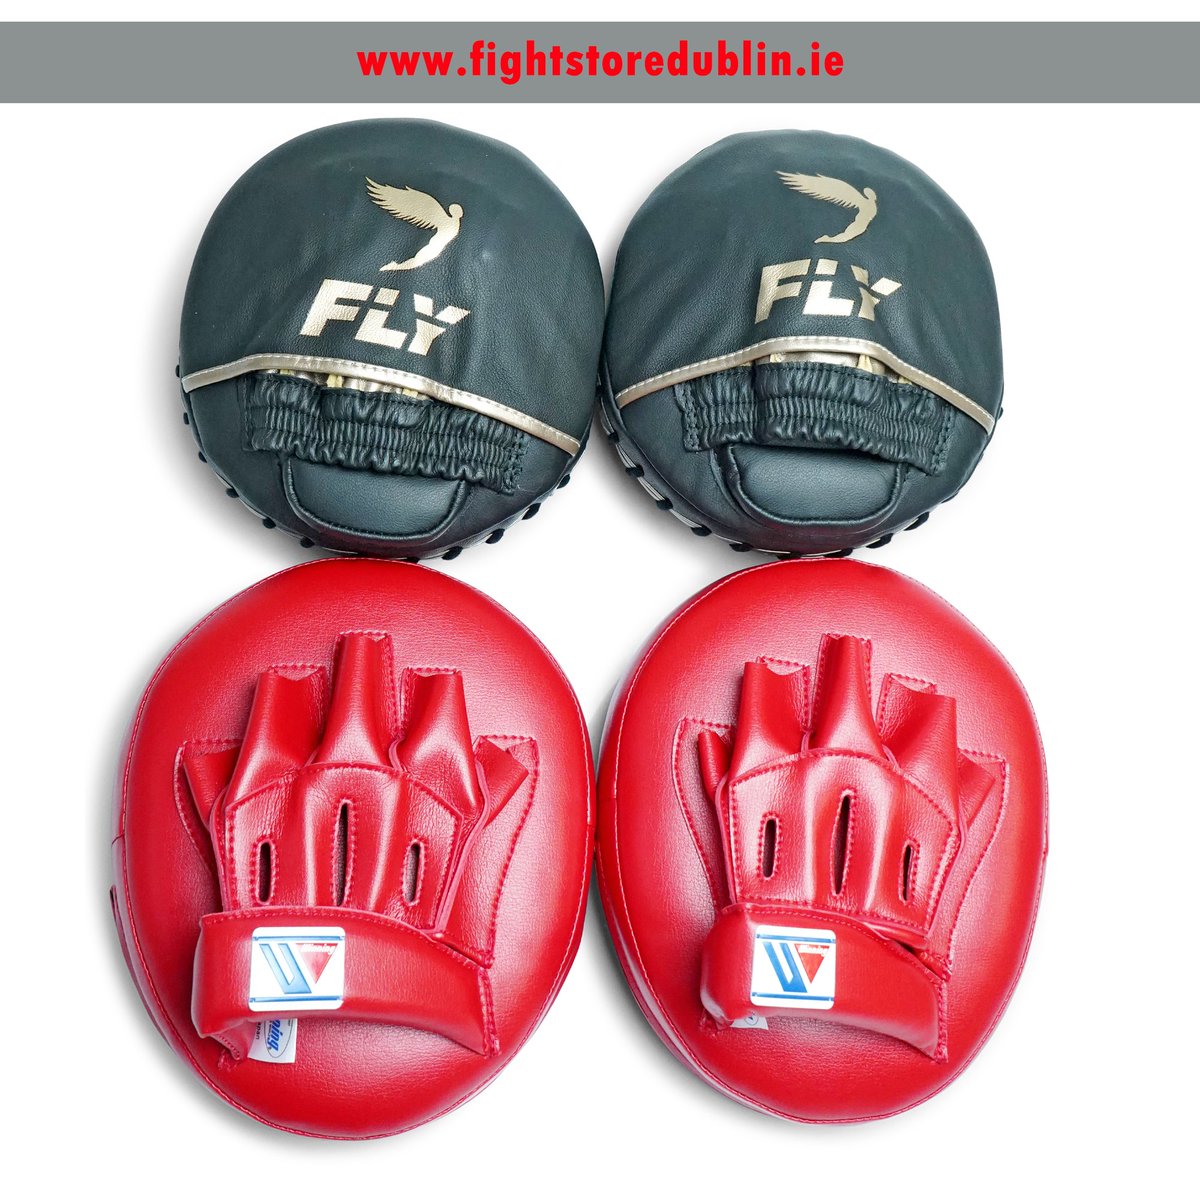 Fly Air Mitts or Winning Air Mitts?
Made in UK vs Made in Japan
Available in store and online 
FightStoreDublin.ie 
#fightstoreireland #thefighterschoice® 
#fly #flyboxing #winningboxing #airmitts #boxeo #boxe #boxen #boxing #irishboxing